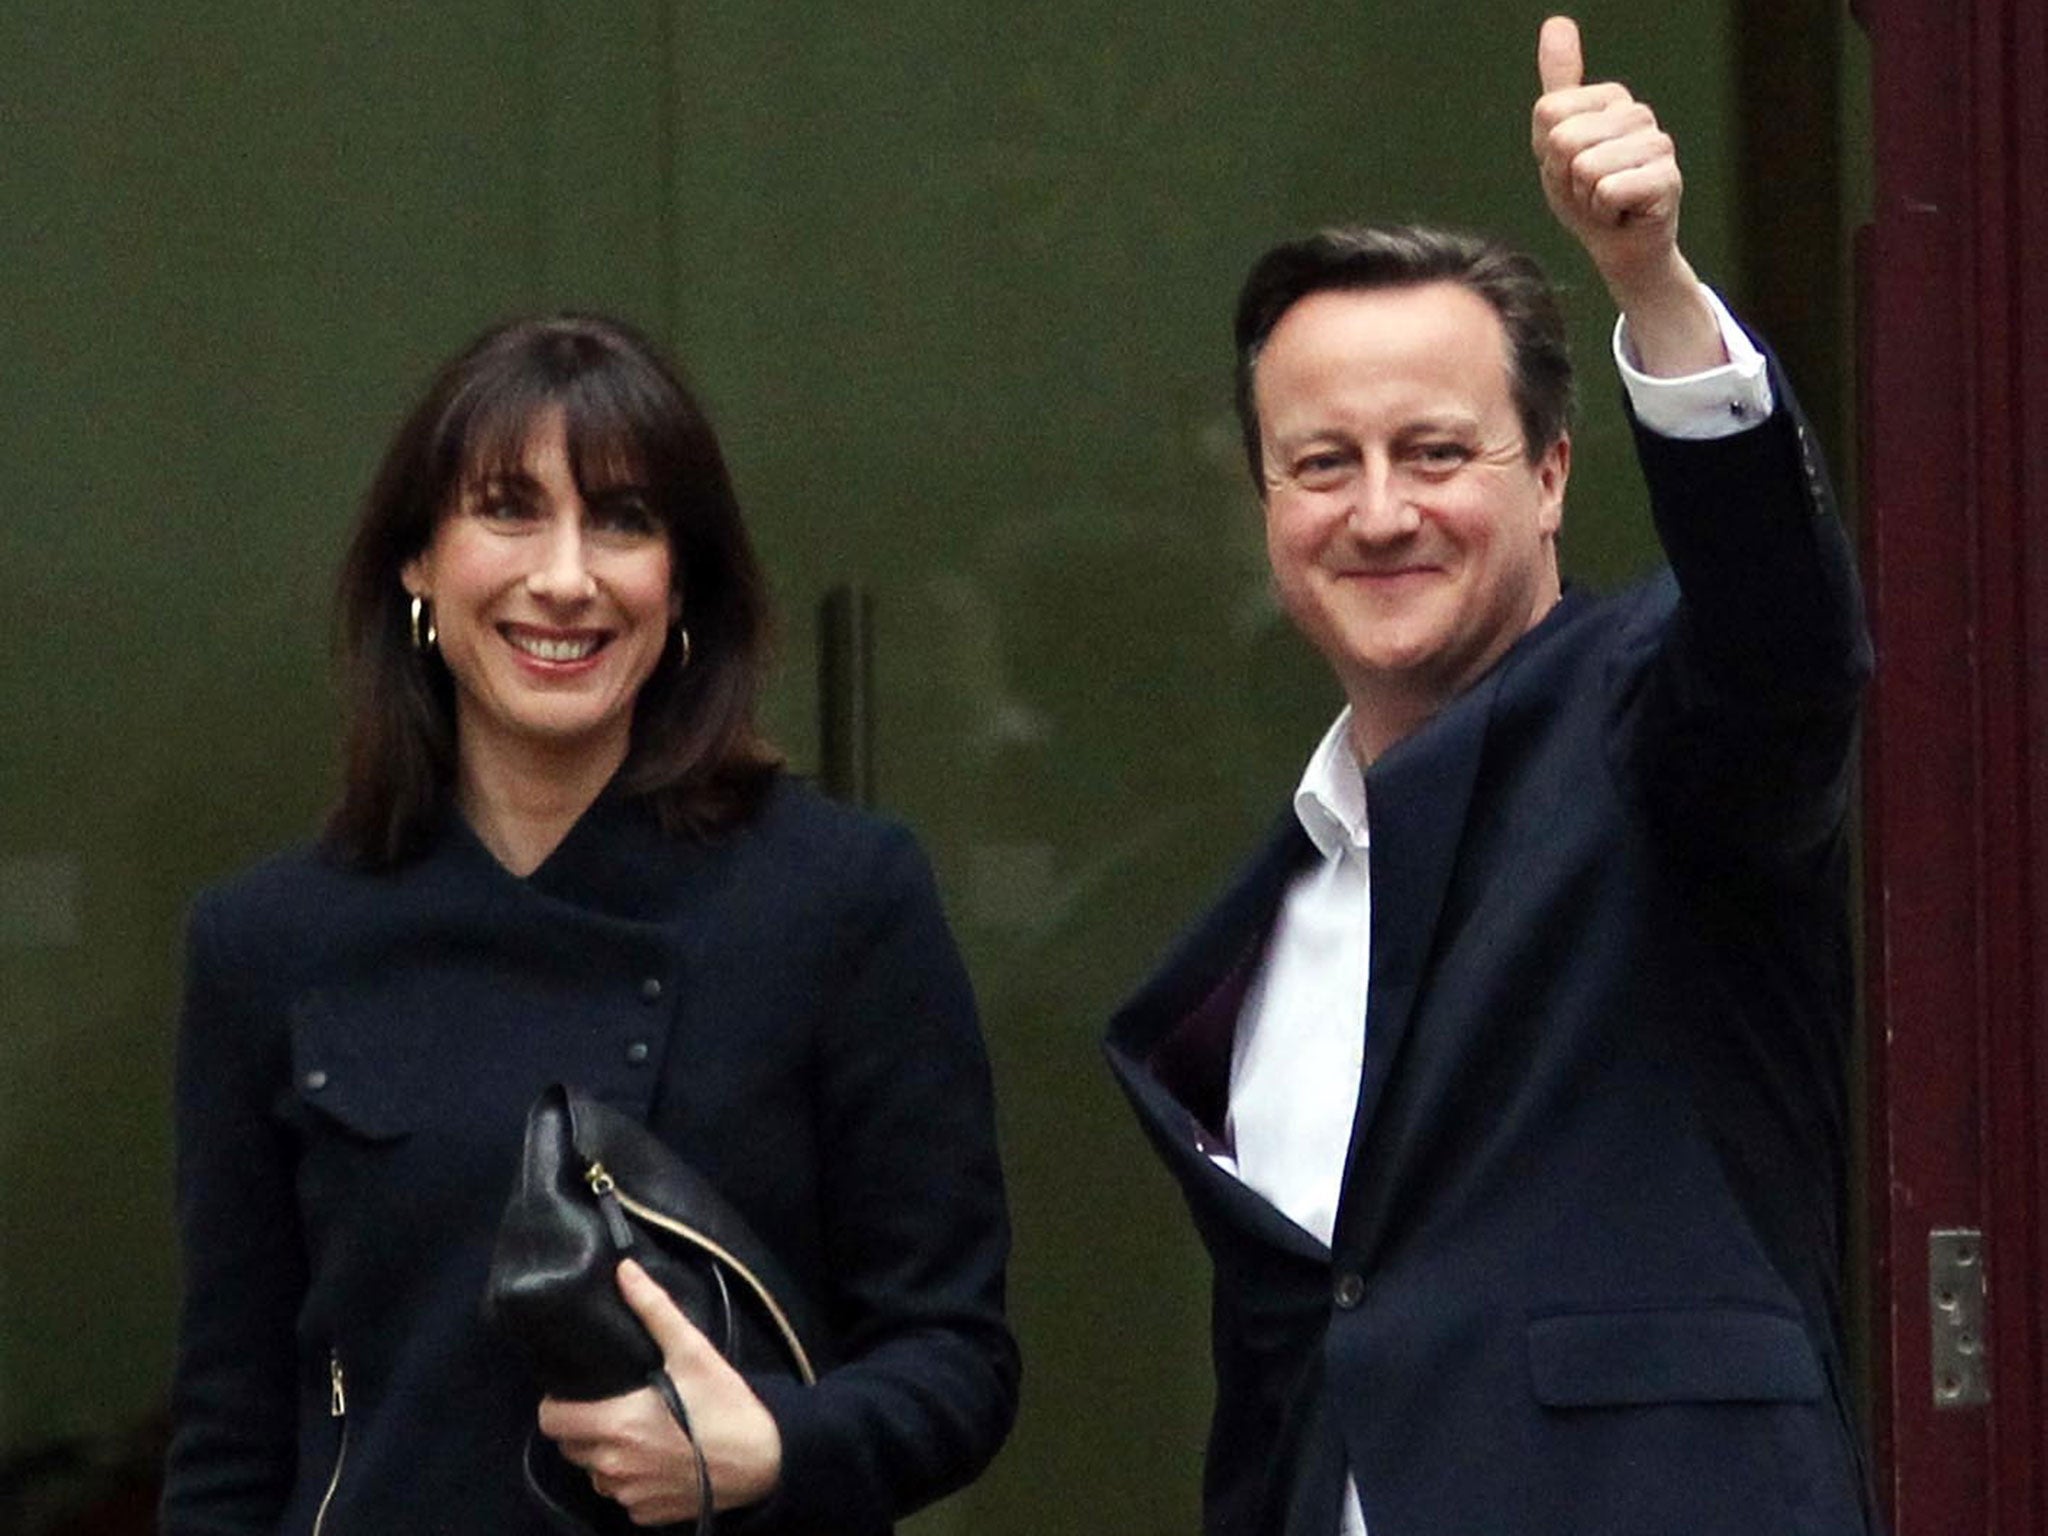 Prime Minister David Cameron and wife Samantha arrive at his Tory headquarters in central London after the General Election put his Conservative Party on the brink of securing an absolute majority in the House of Commons 